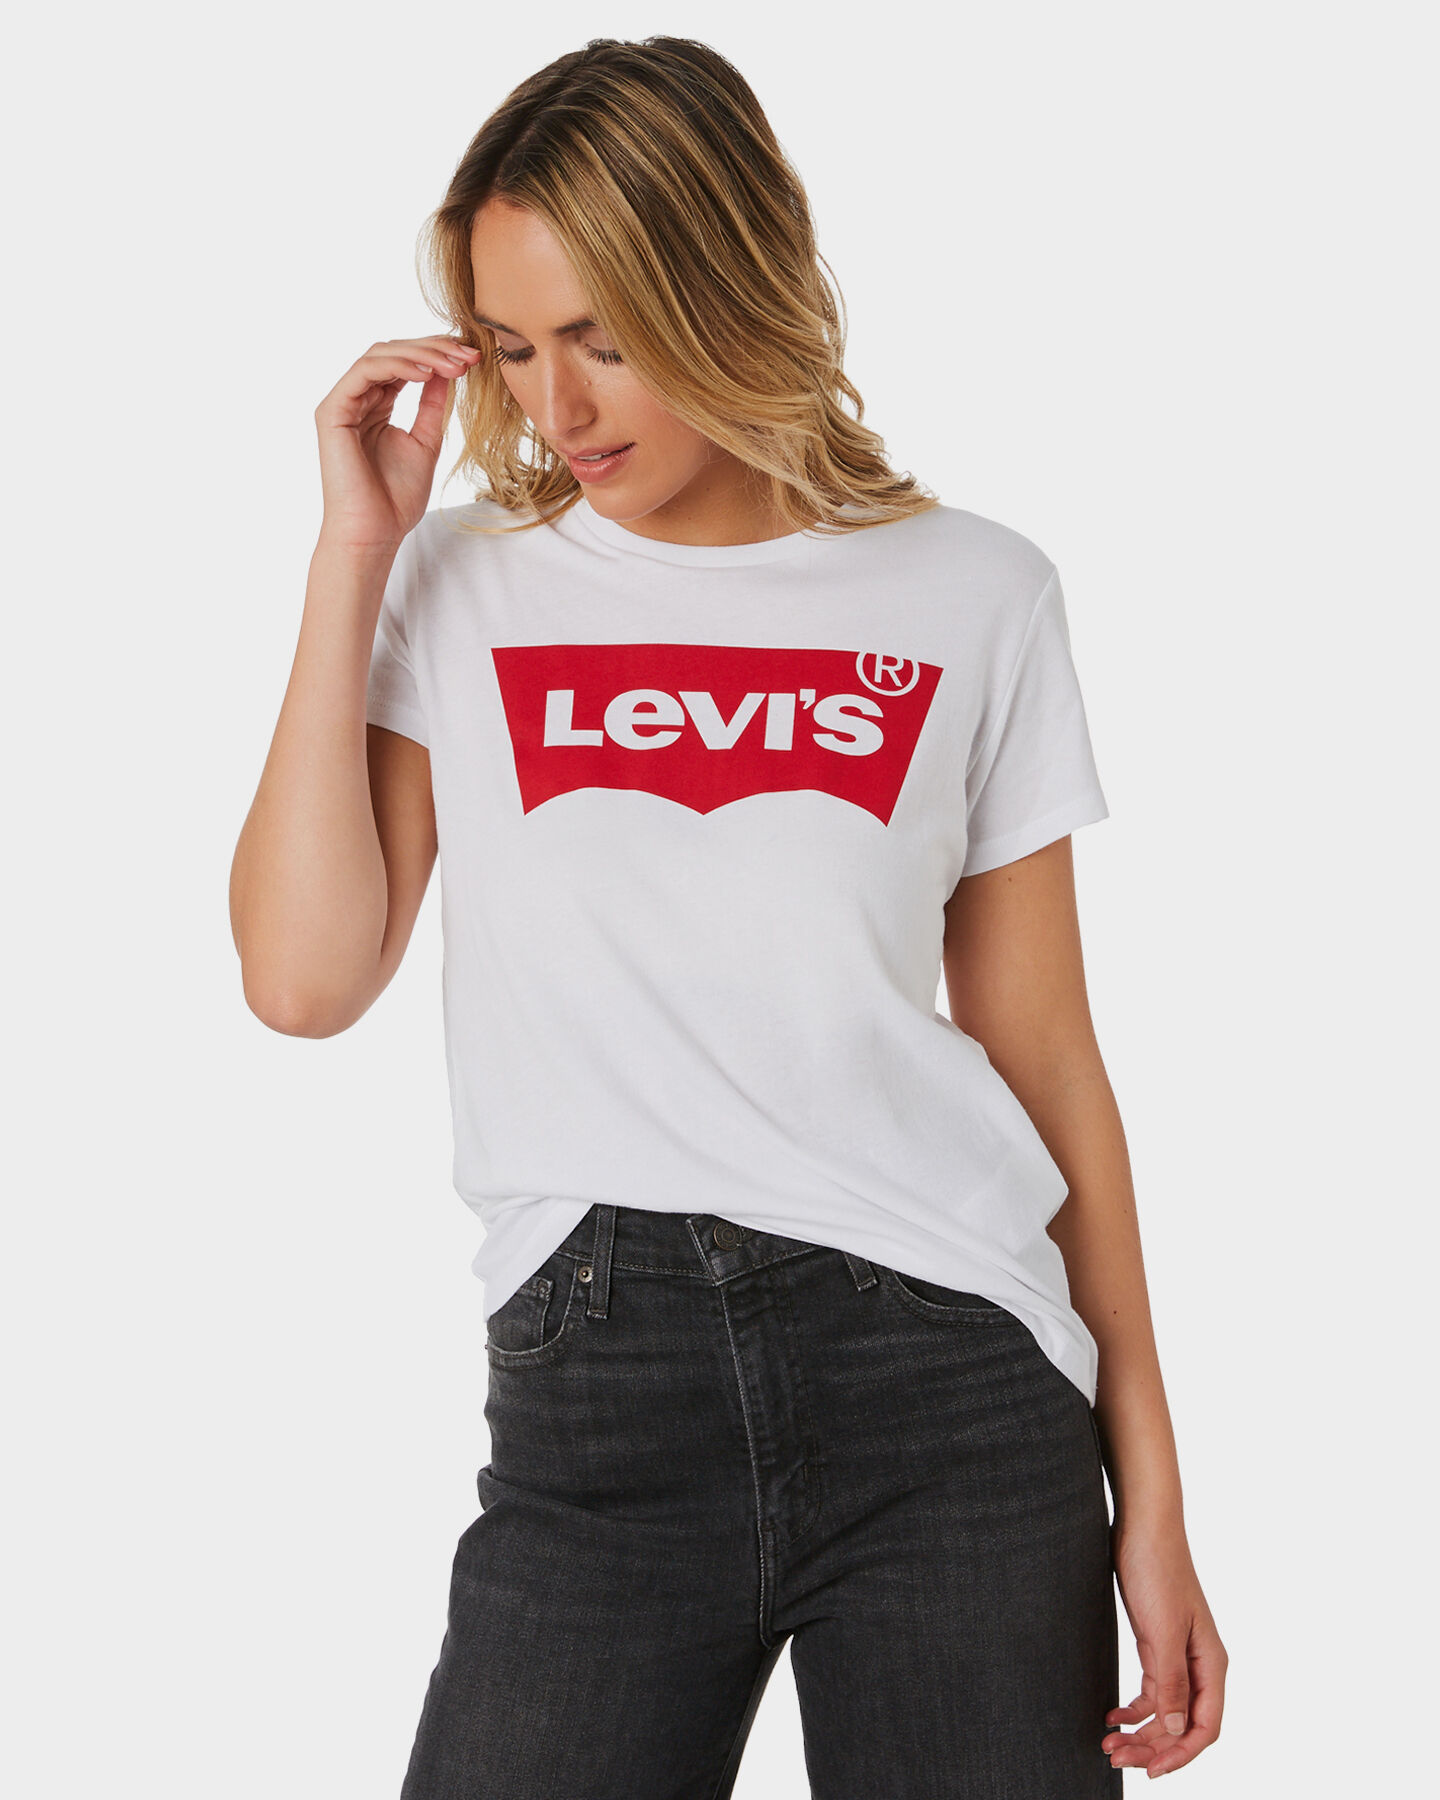 levis tops and tees for womens